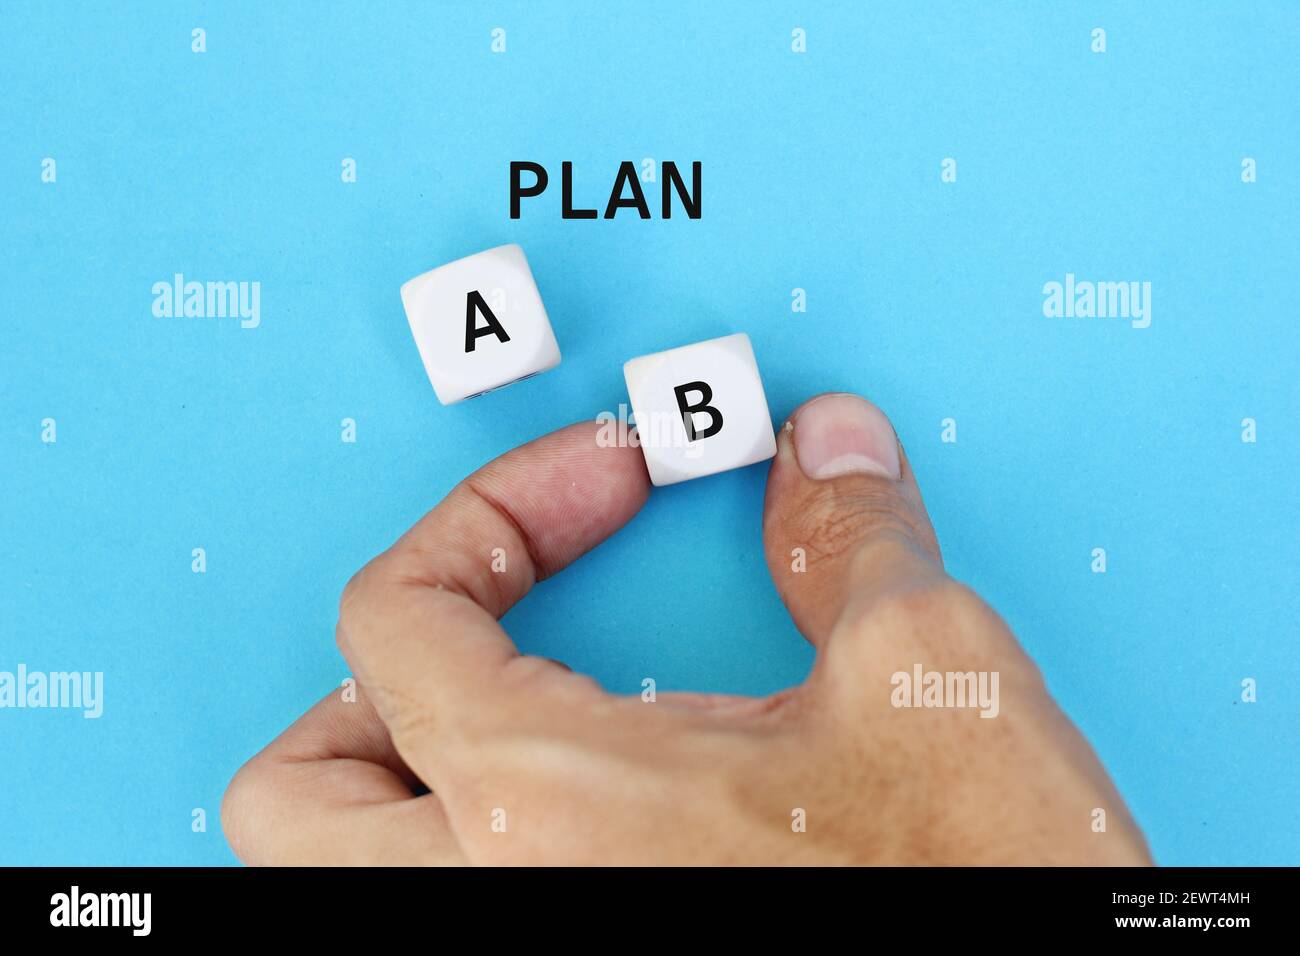 Hand of a businessman choosing business plan b out of two options on Blue background. Business strategy and decisions concept. Stock Photo